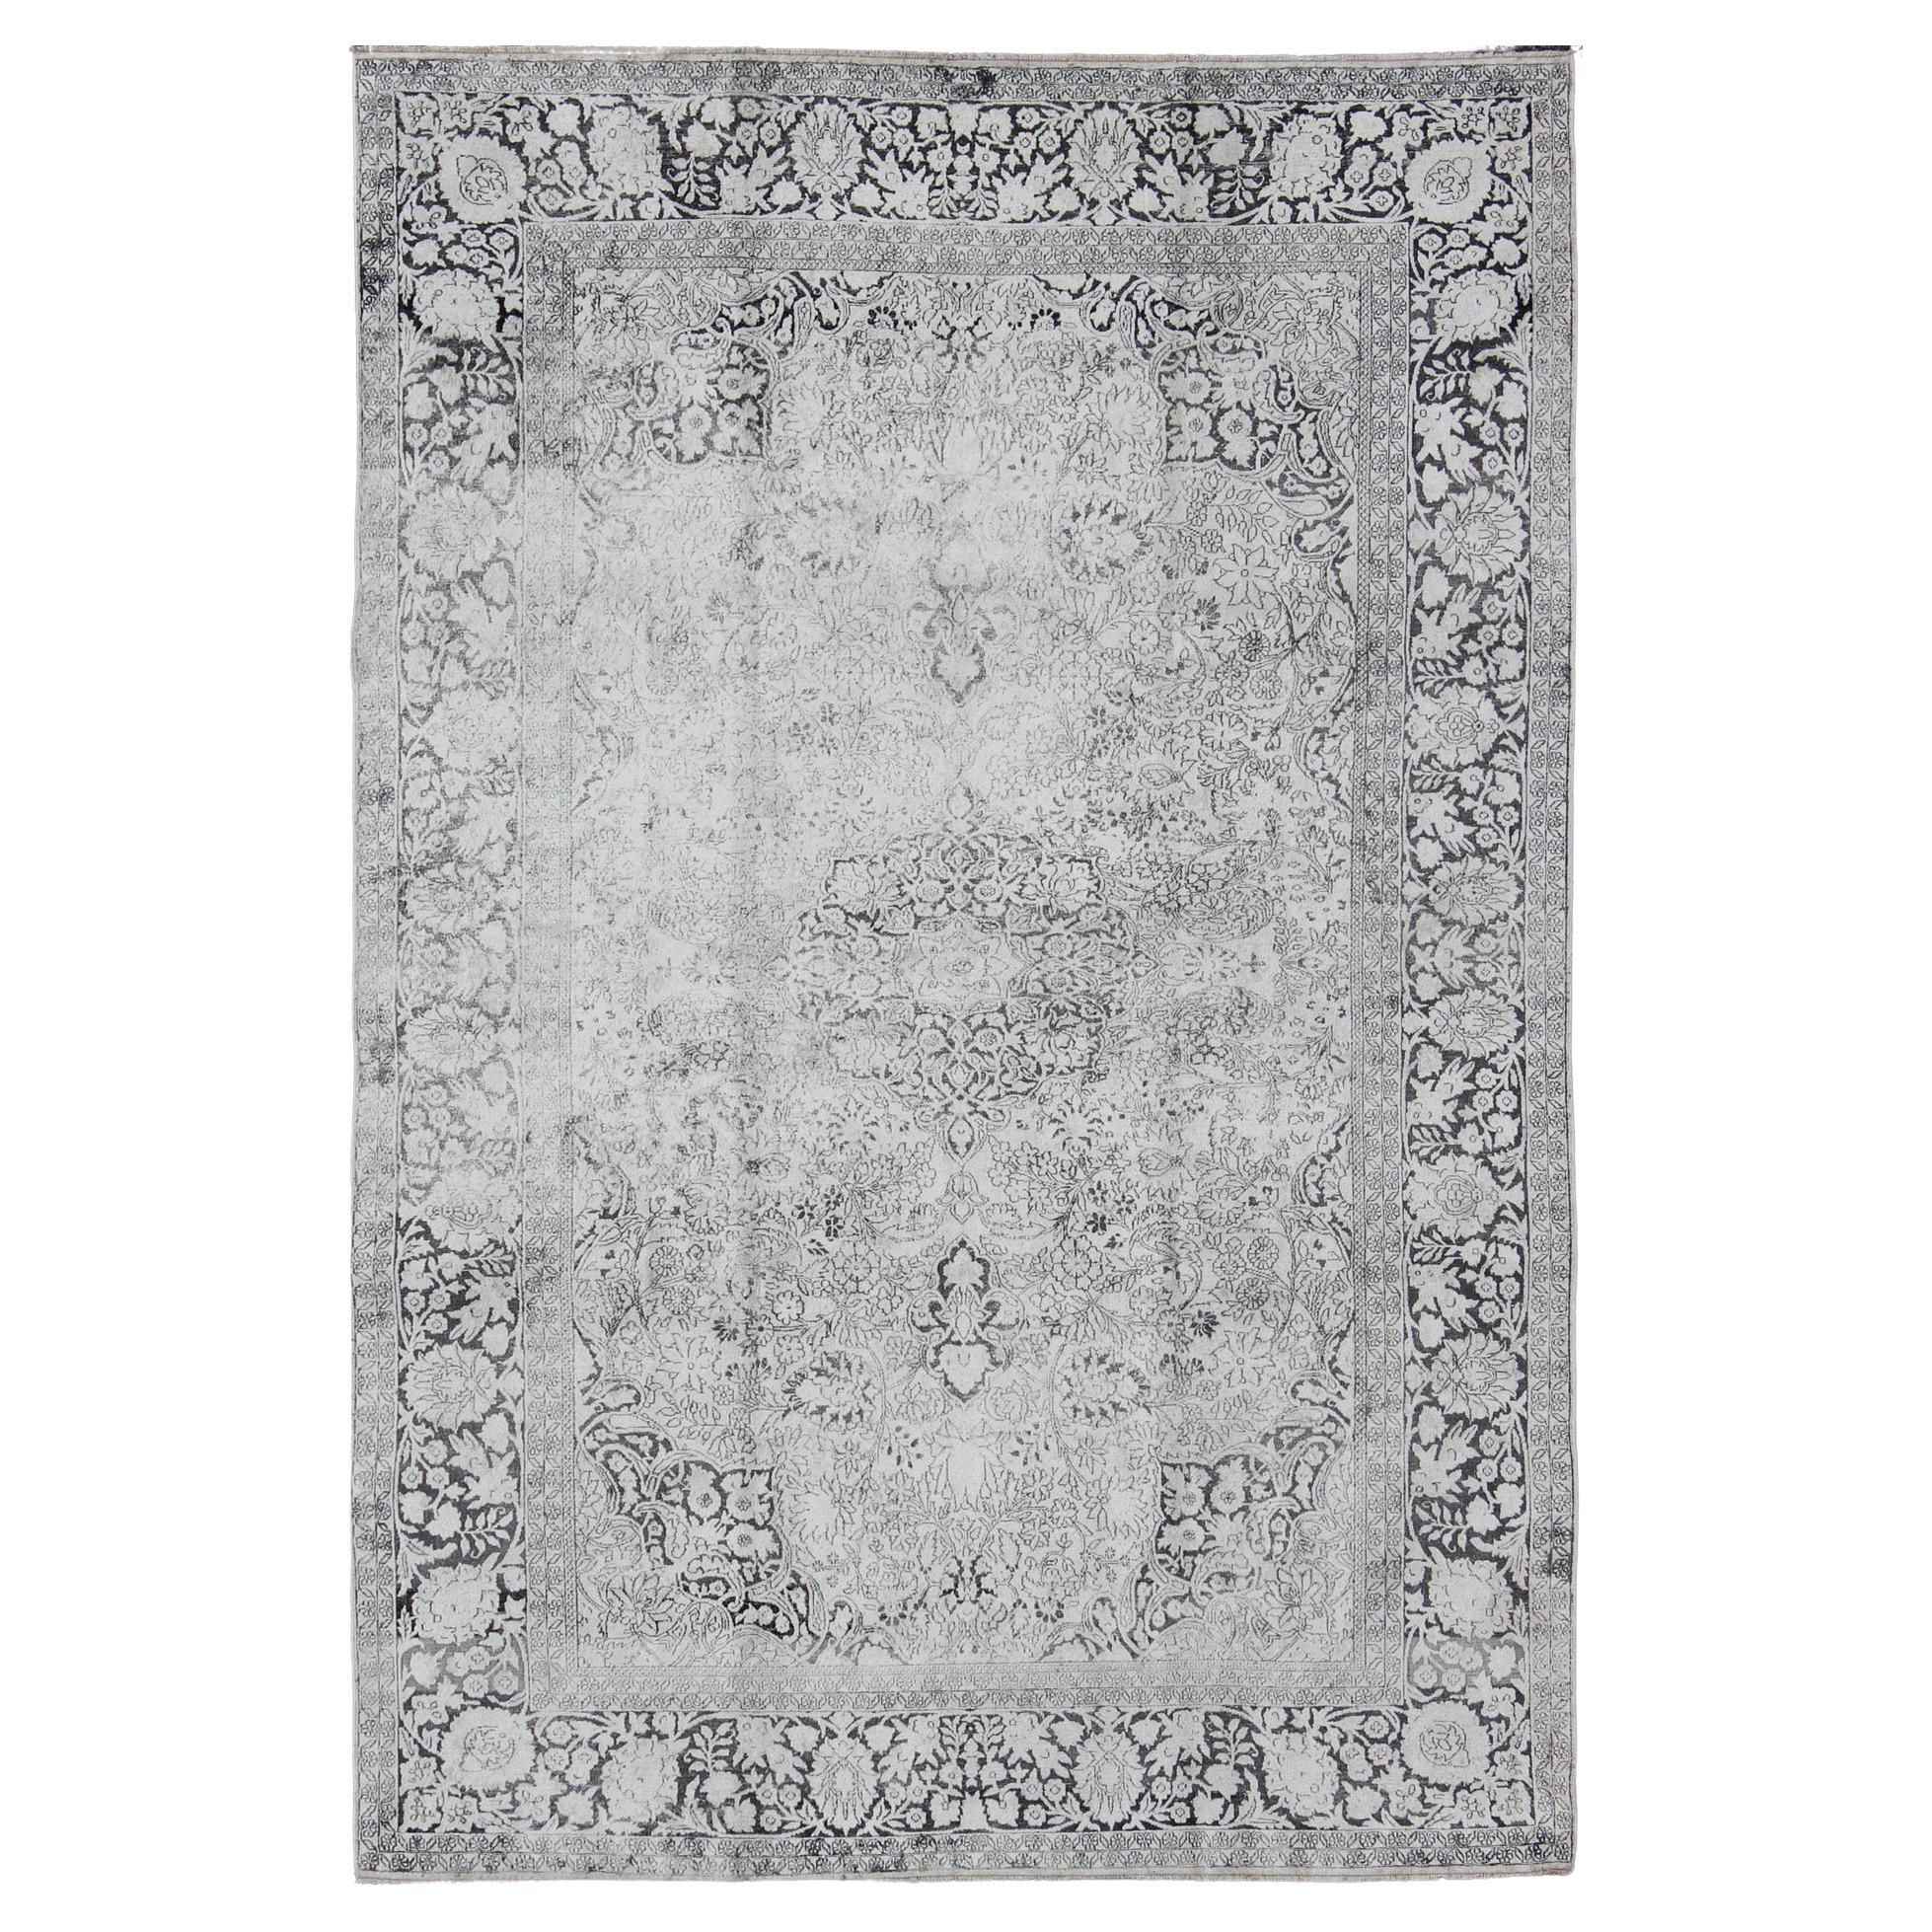 Vintage Sivas Wool and Silk Rug in White, Gray, Black and Charcoal